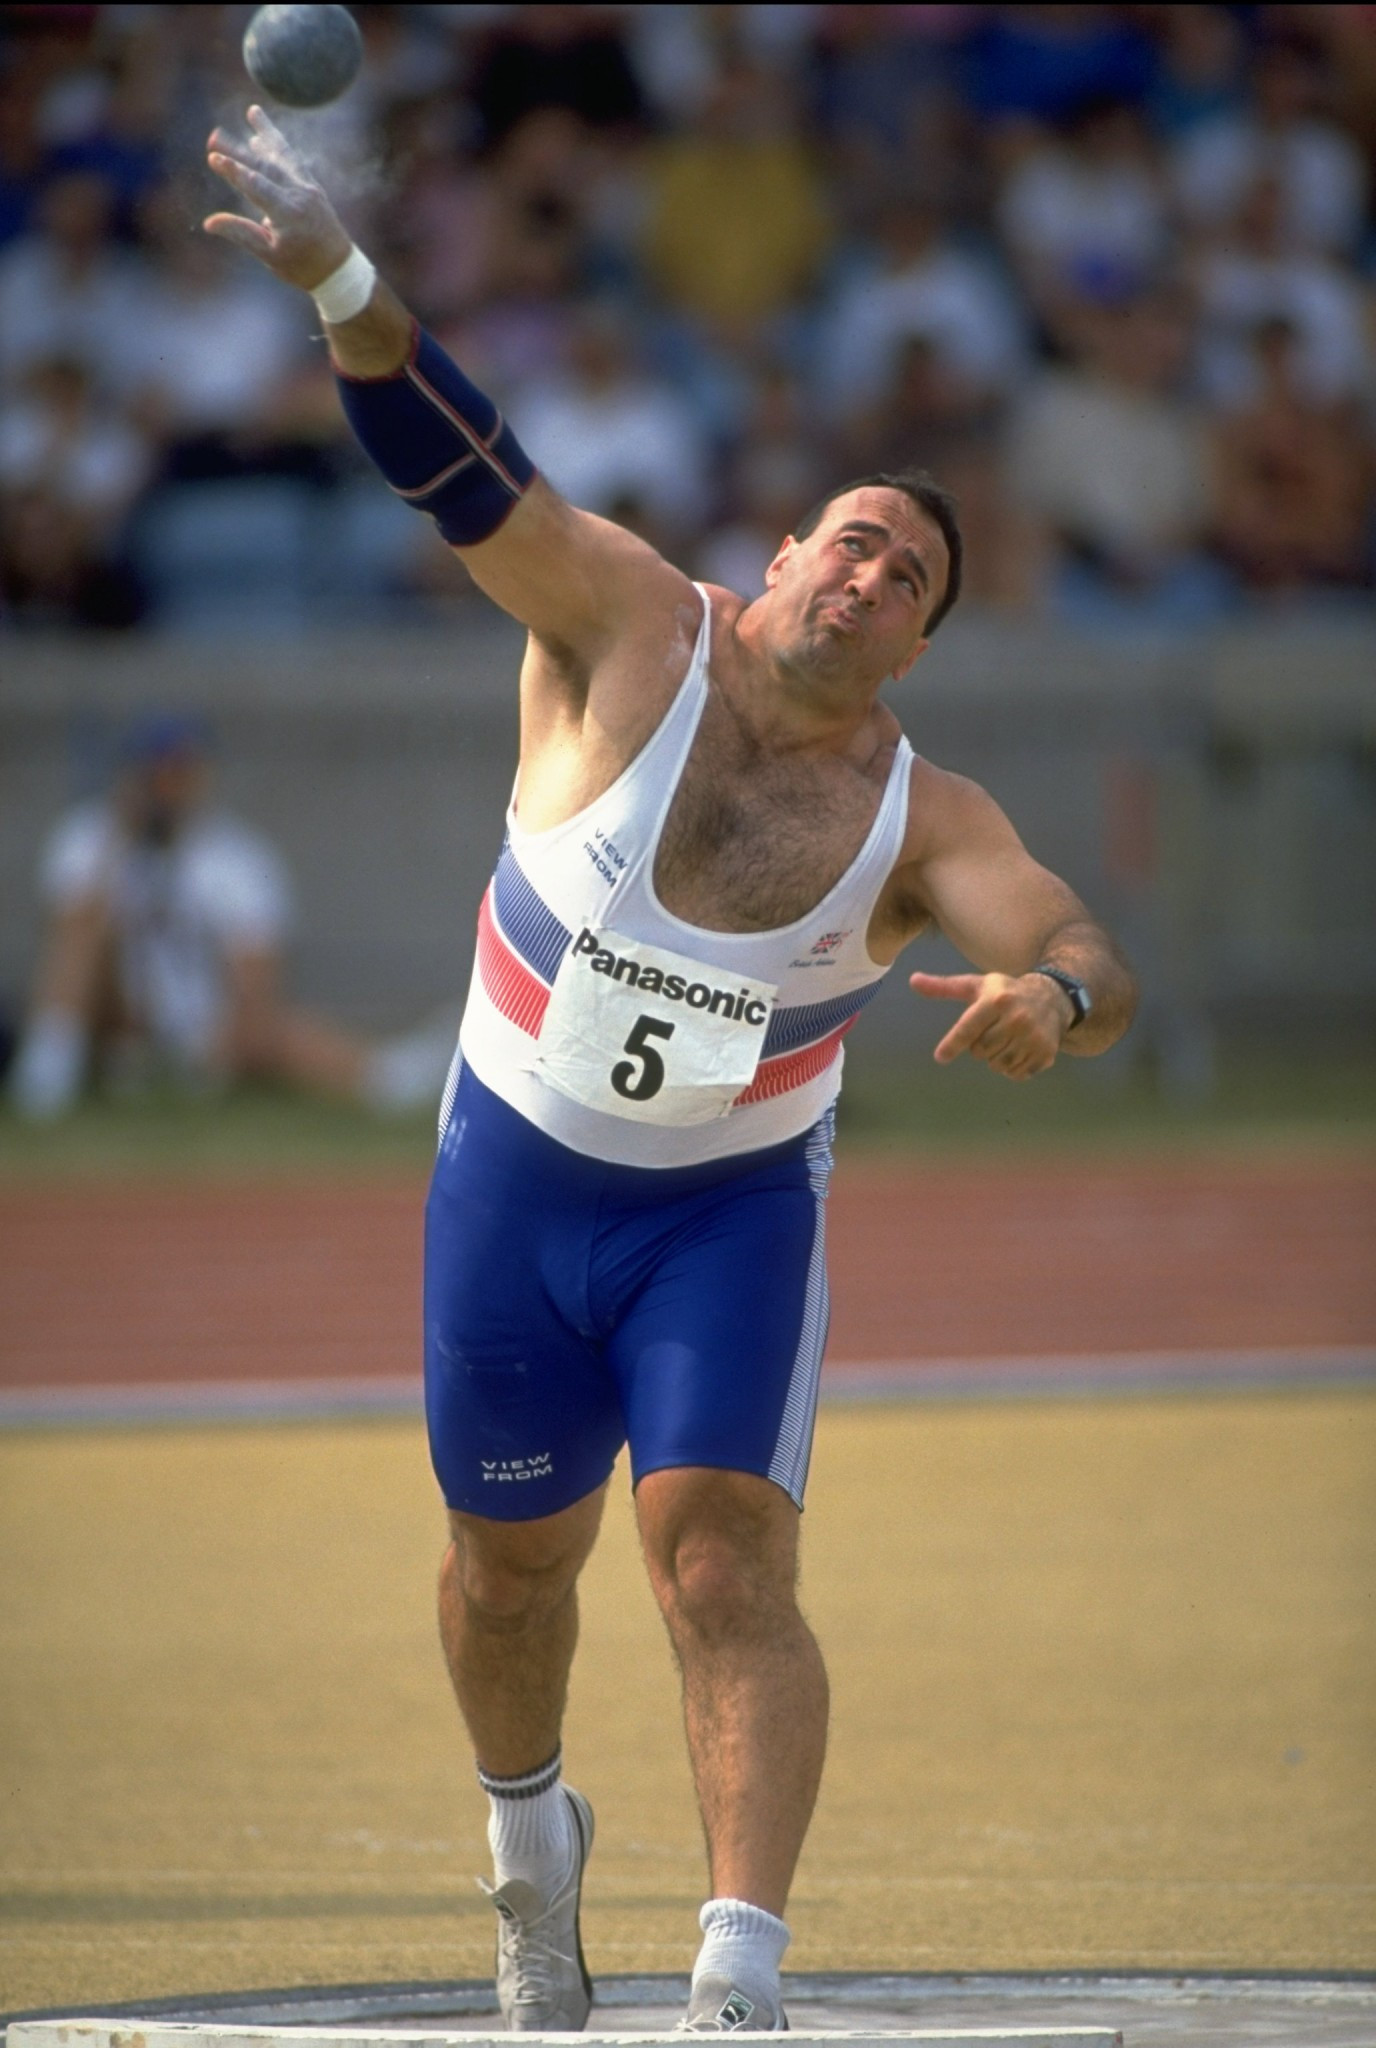 Paul Edwards, pictured during his international shot putting days, continues to dispute doping charges that earned him a life ban in 1997 ©Getty Images